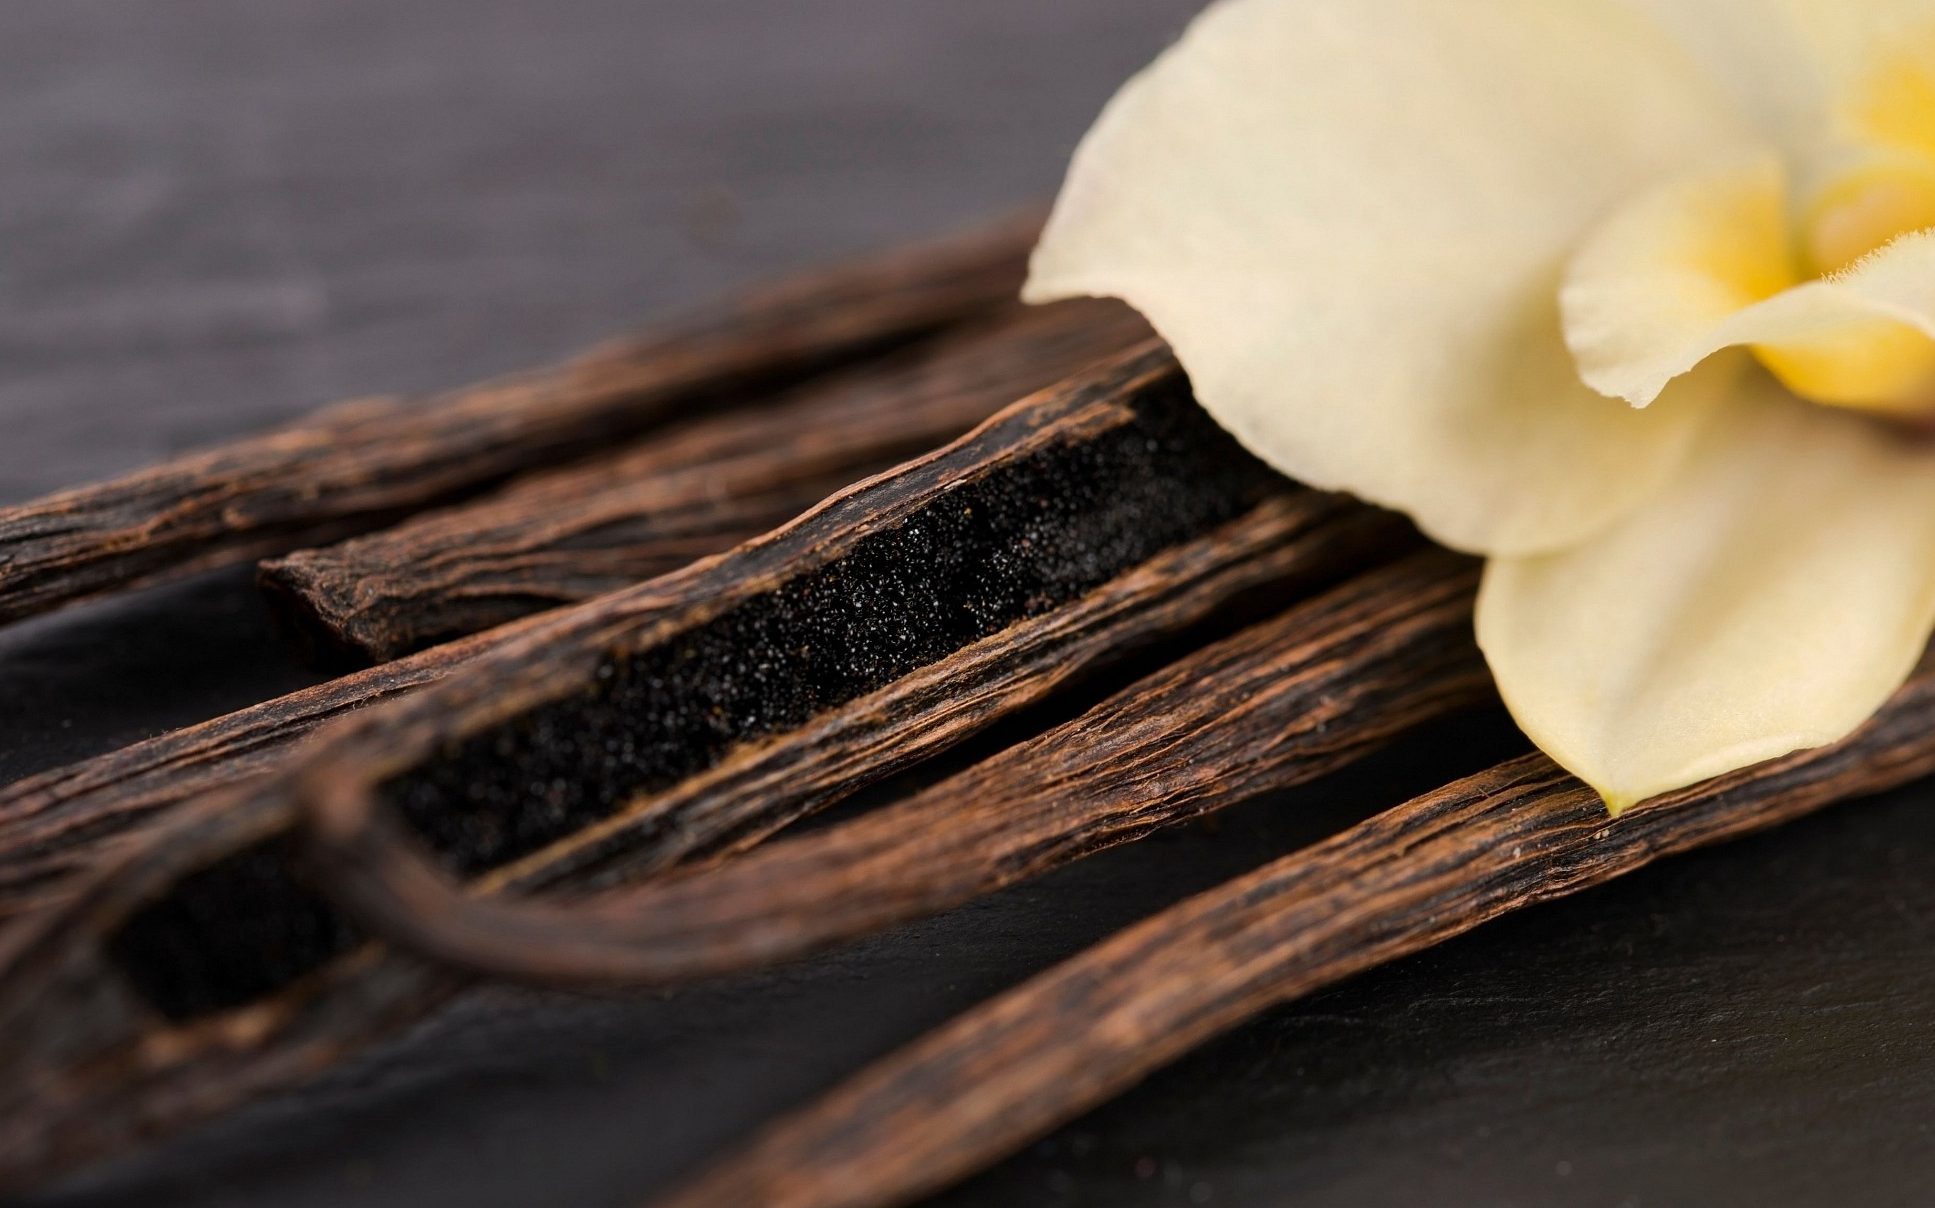 Vanilla – the spice that is more expensive than gold